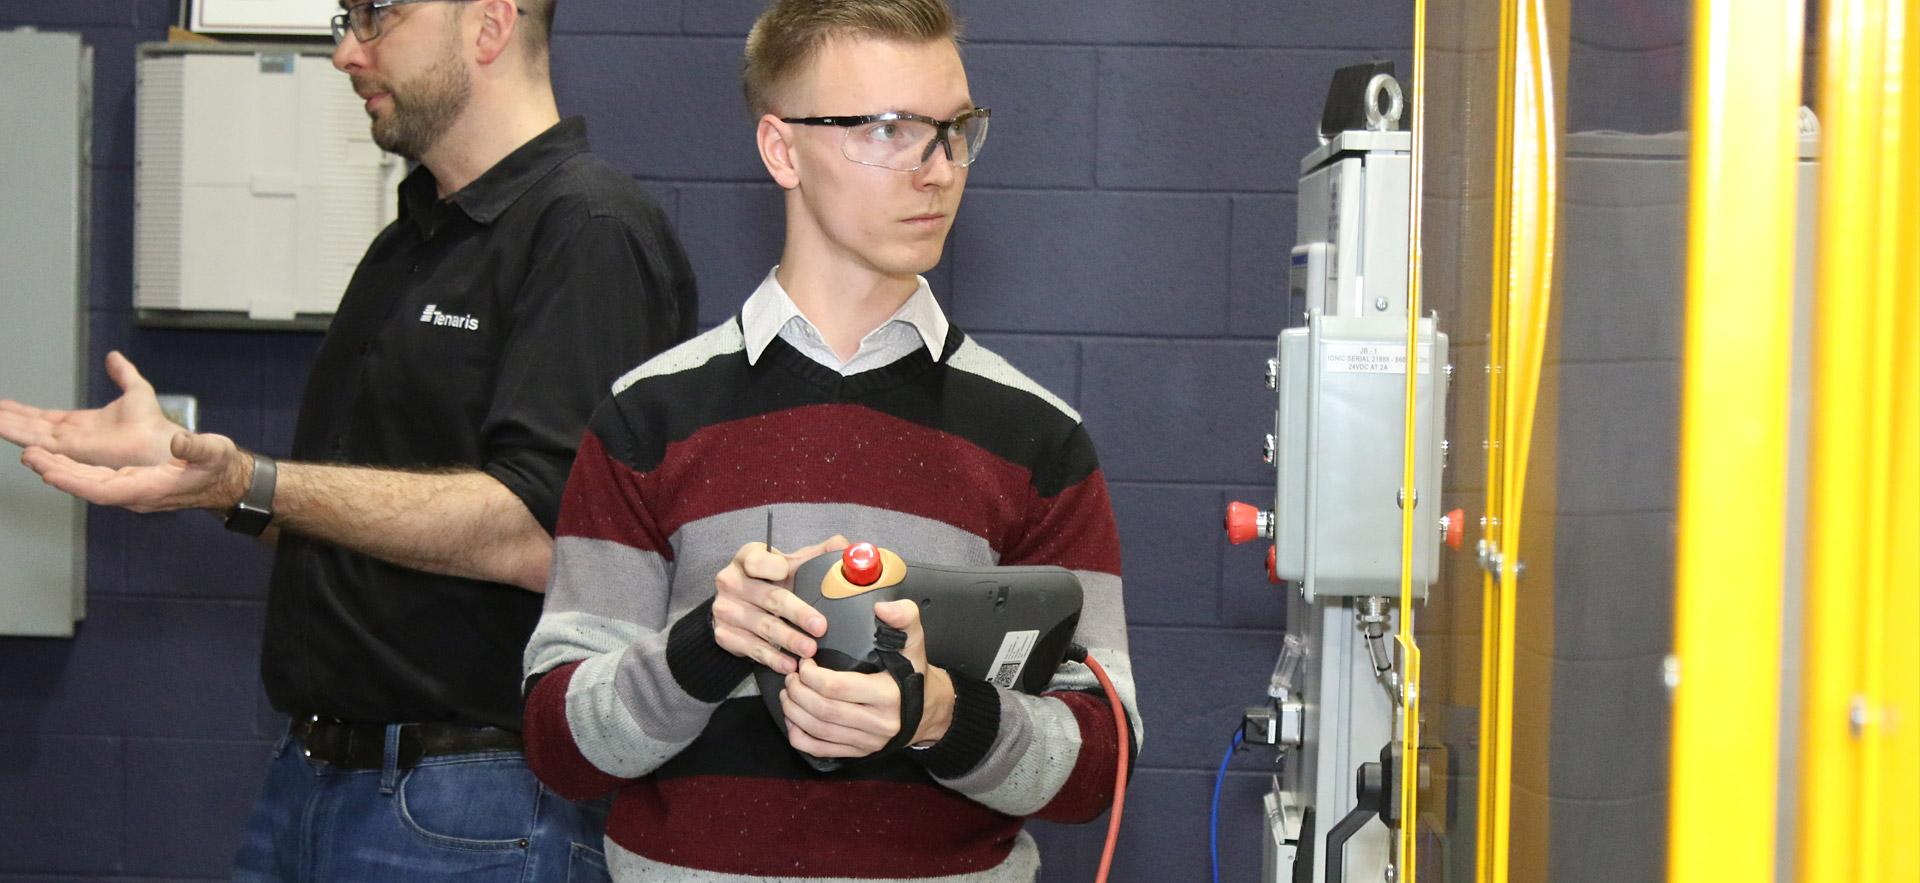 A male student demonstrating a year-end assignment in robotics.